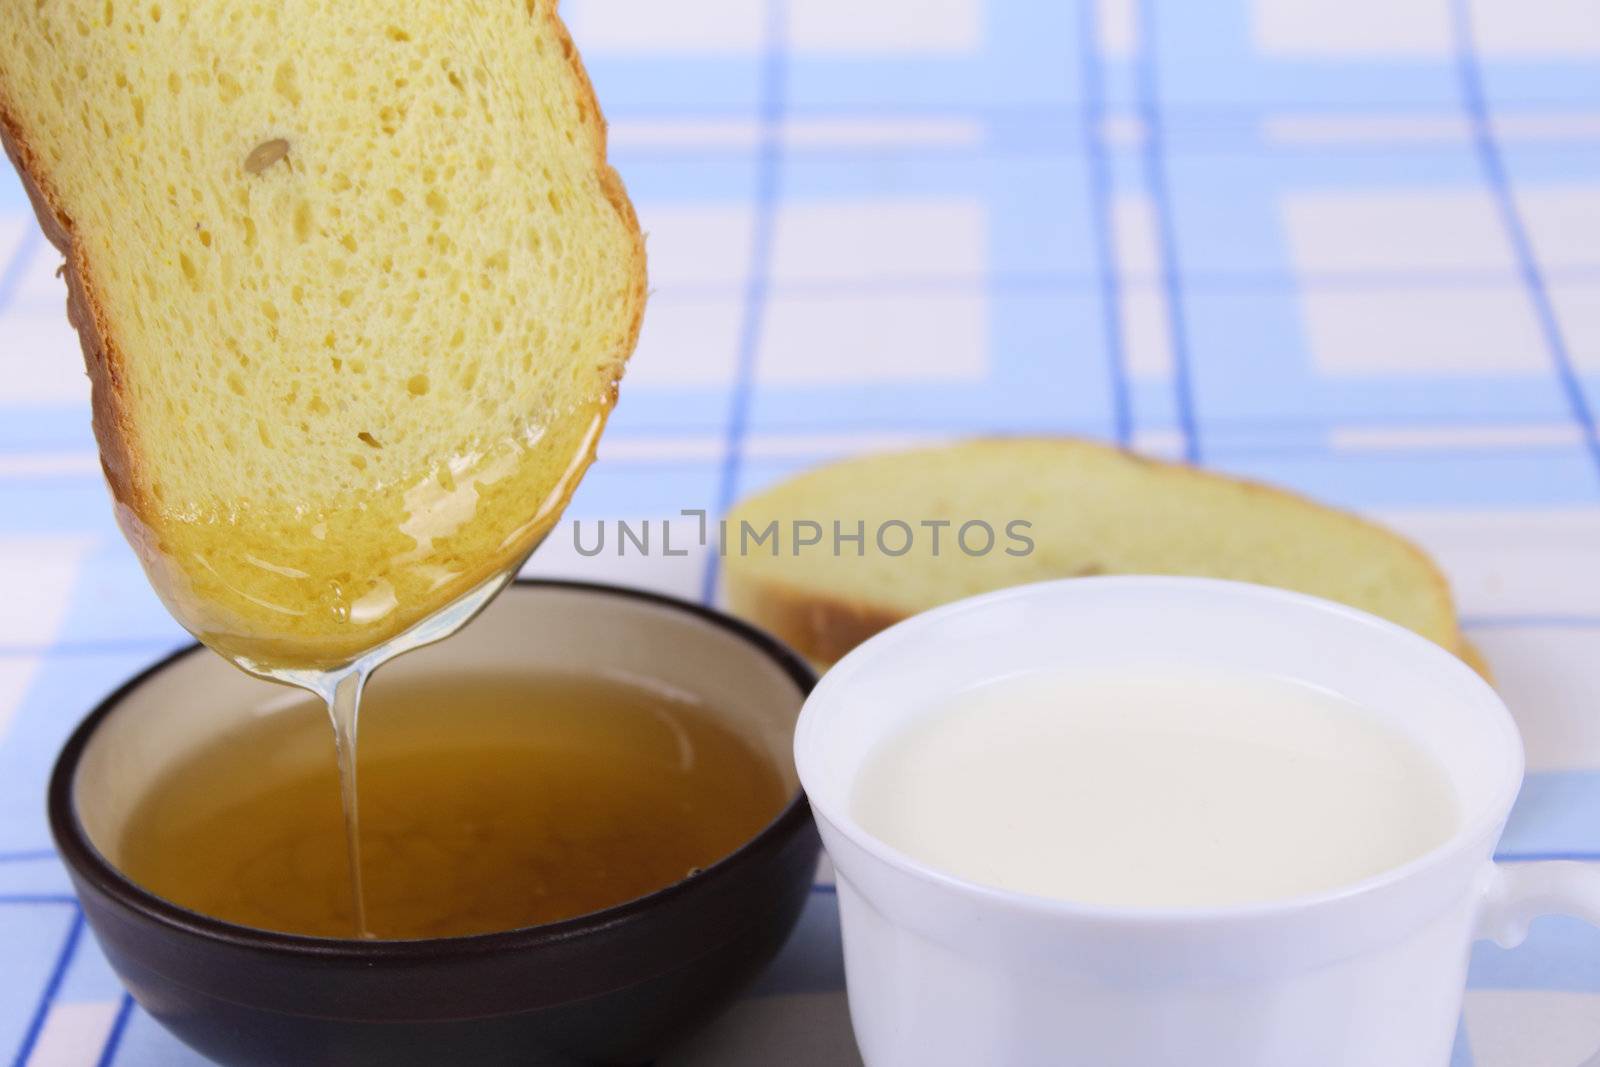 Cornbread with honey and milk on a linen blue napkin removed close up